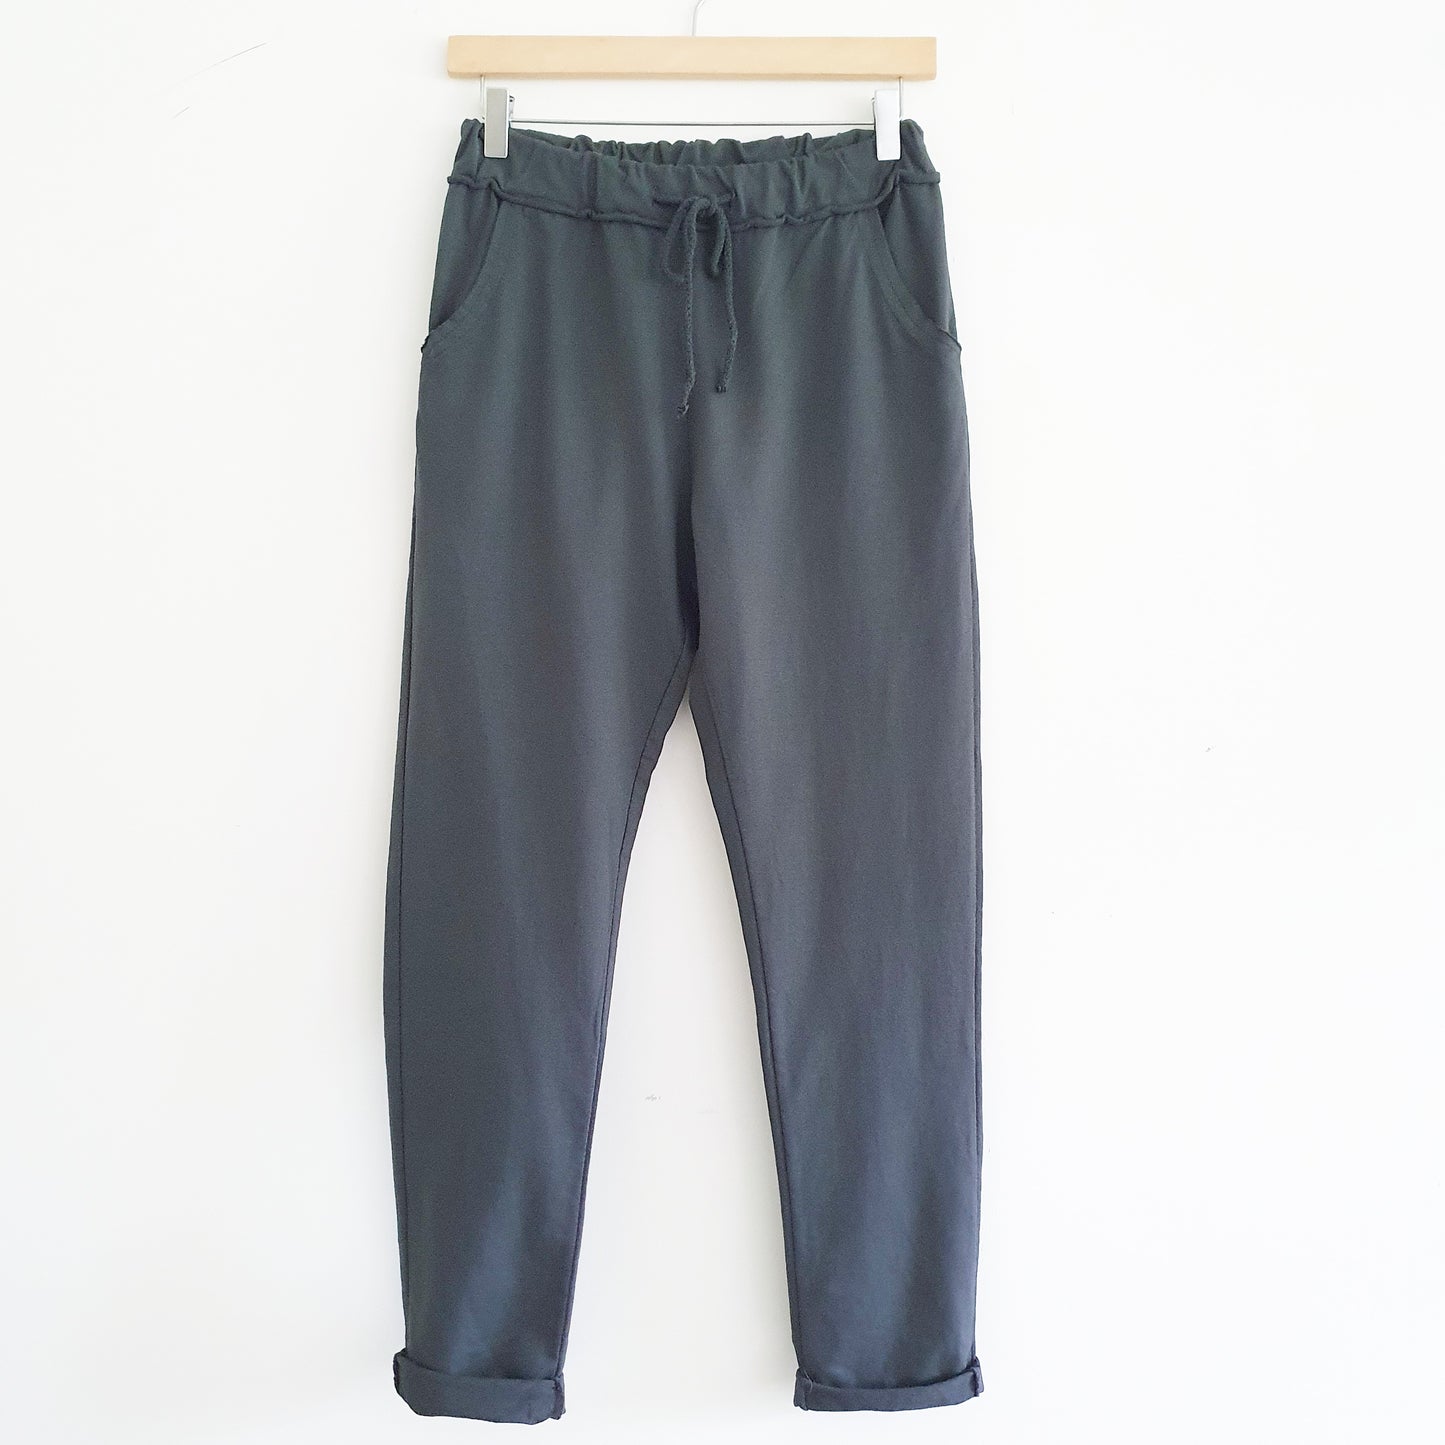 Cotton Lounge Pants in Charcoal